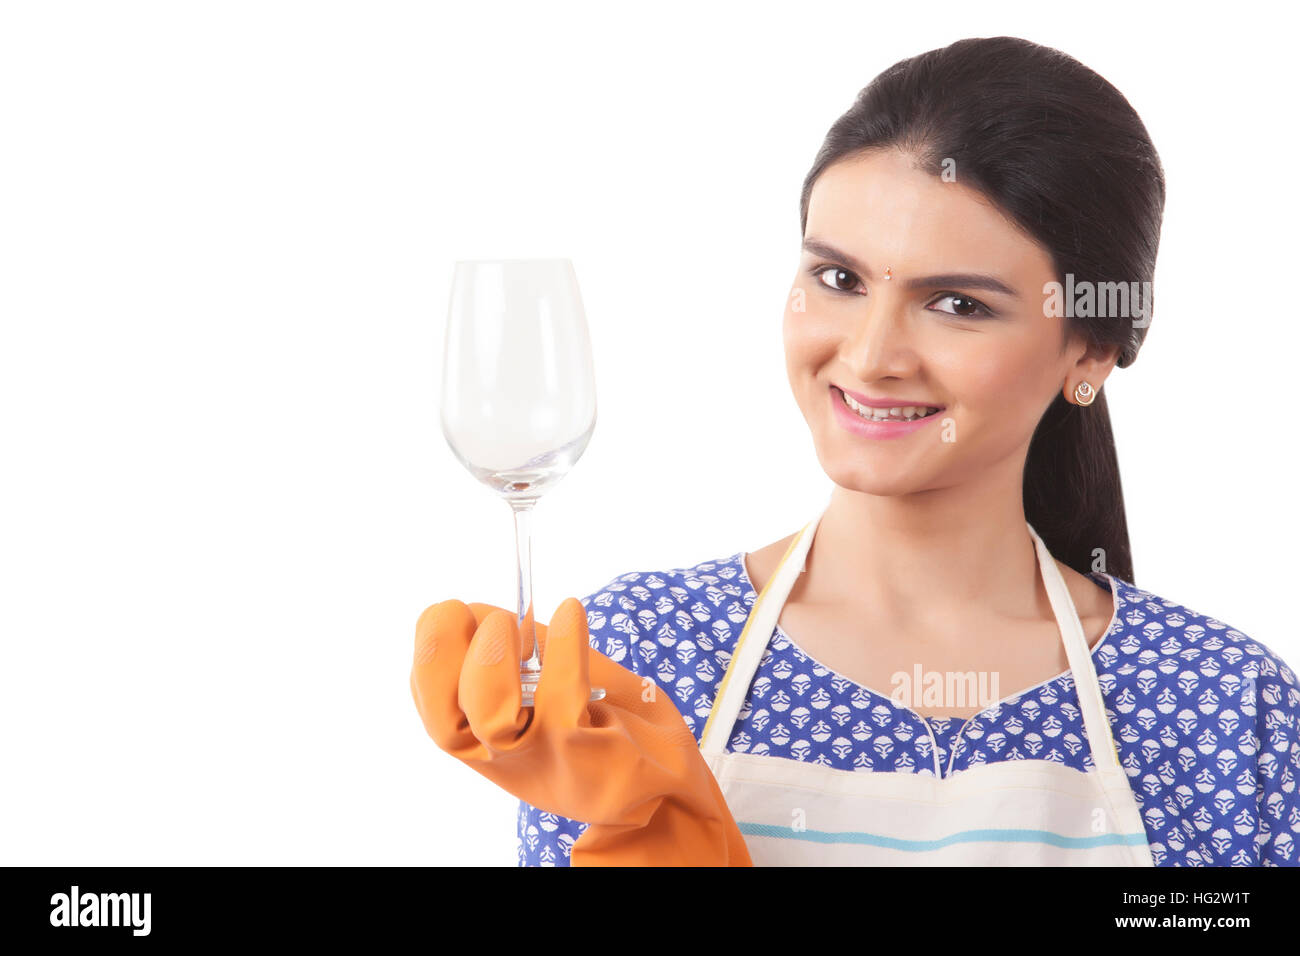 Young Woman Cleaning Wine Glass Stock Photo